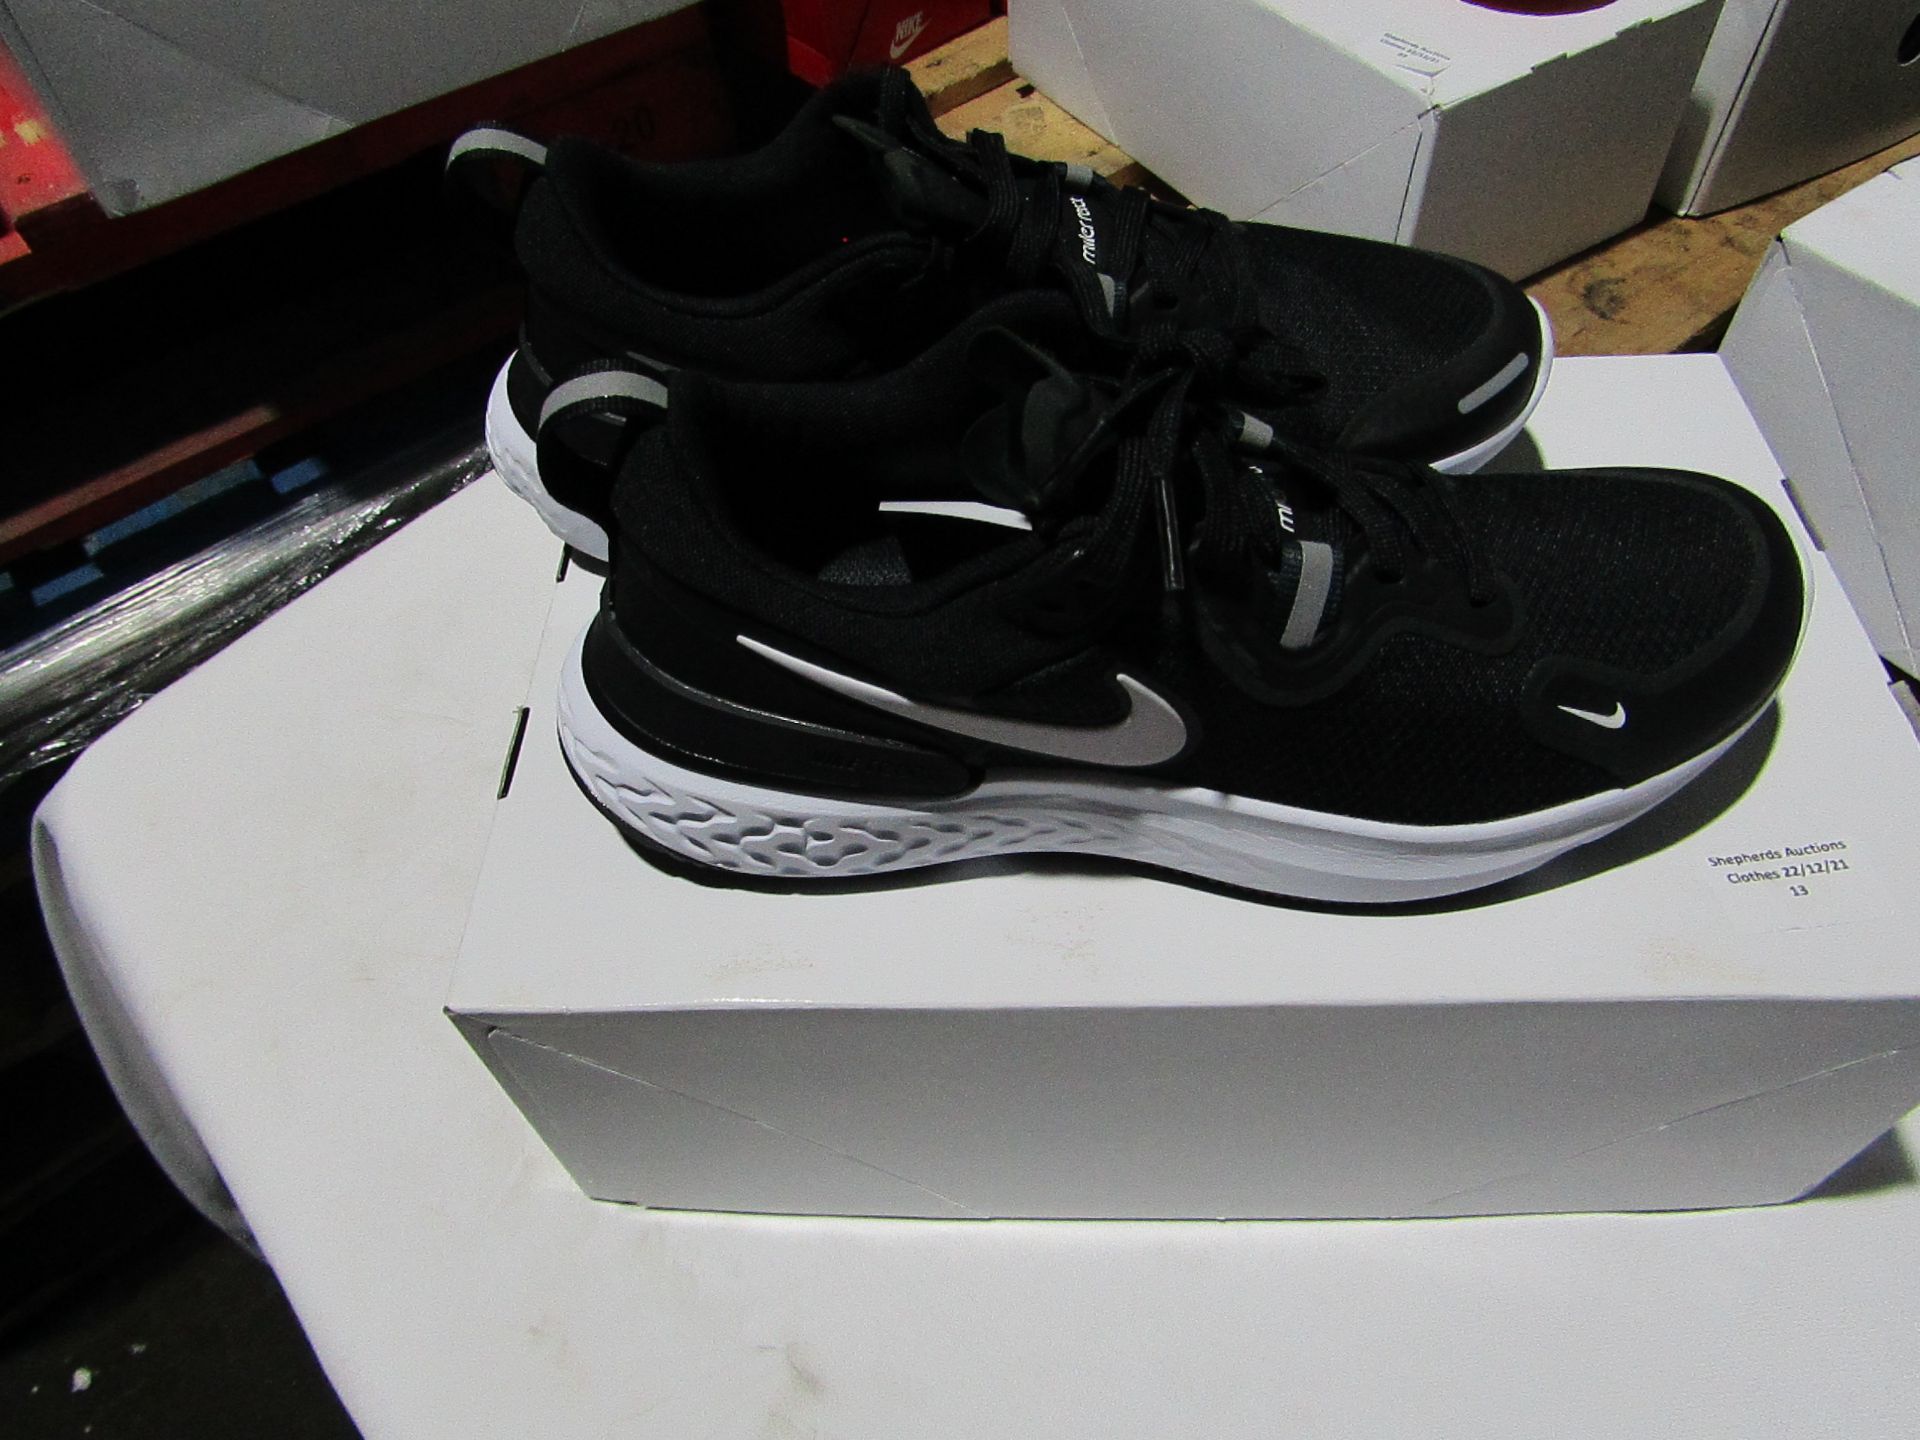 Nike React Miler trainers, new and boxed, Size 4.5 Uk RRP œ99